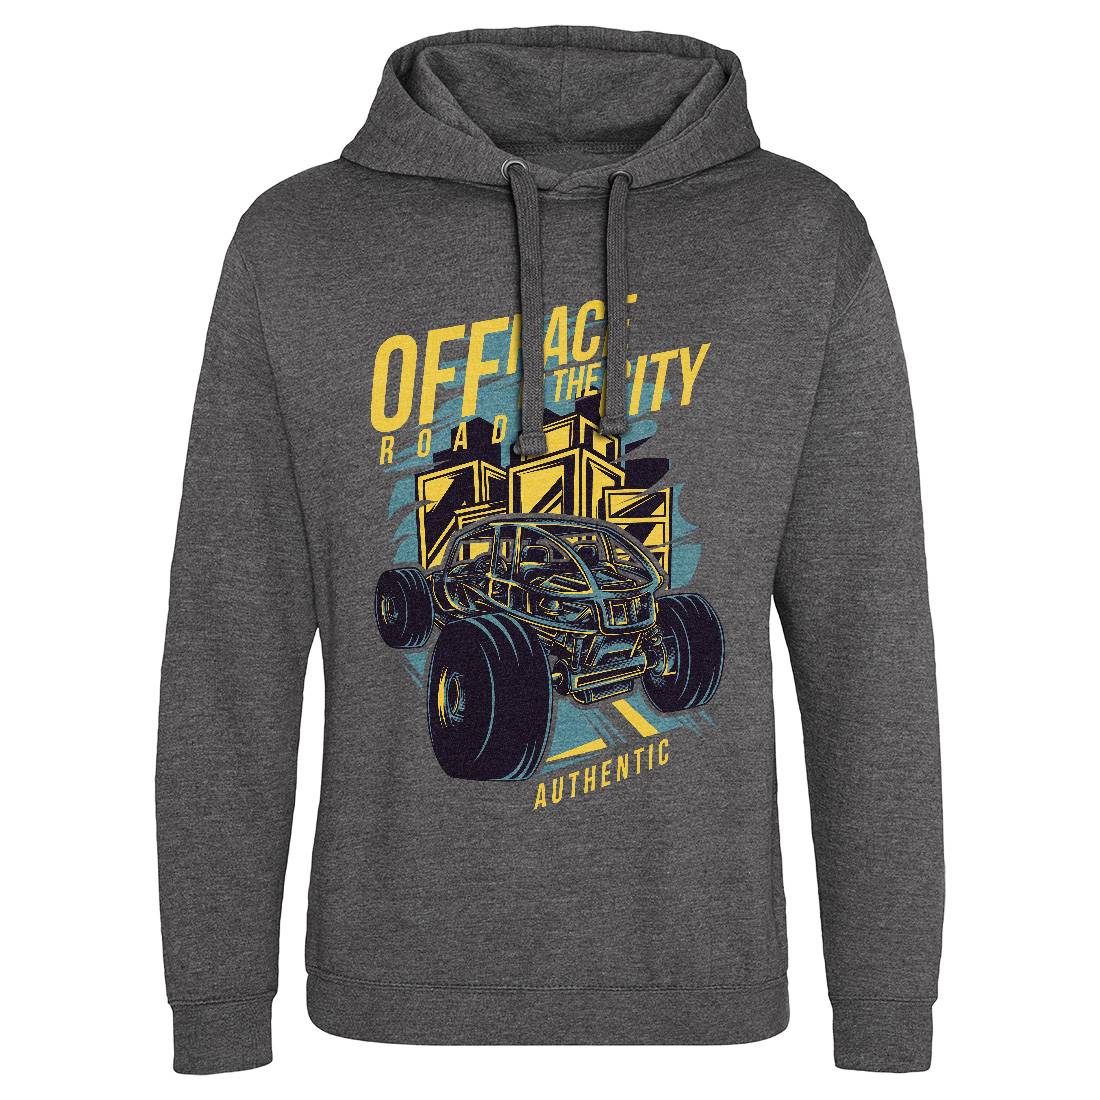 Race In The City Mens Hoodie Without Pocket Cars D687